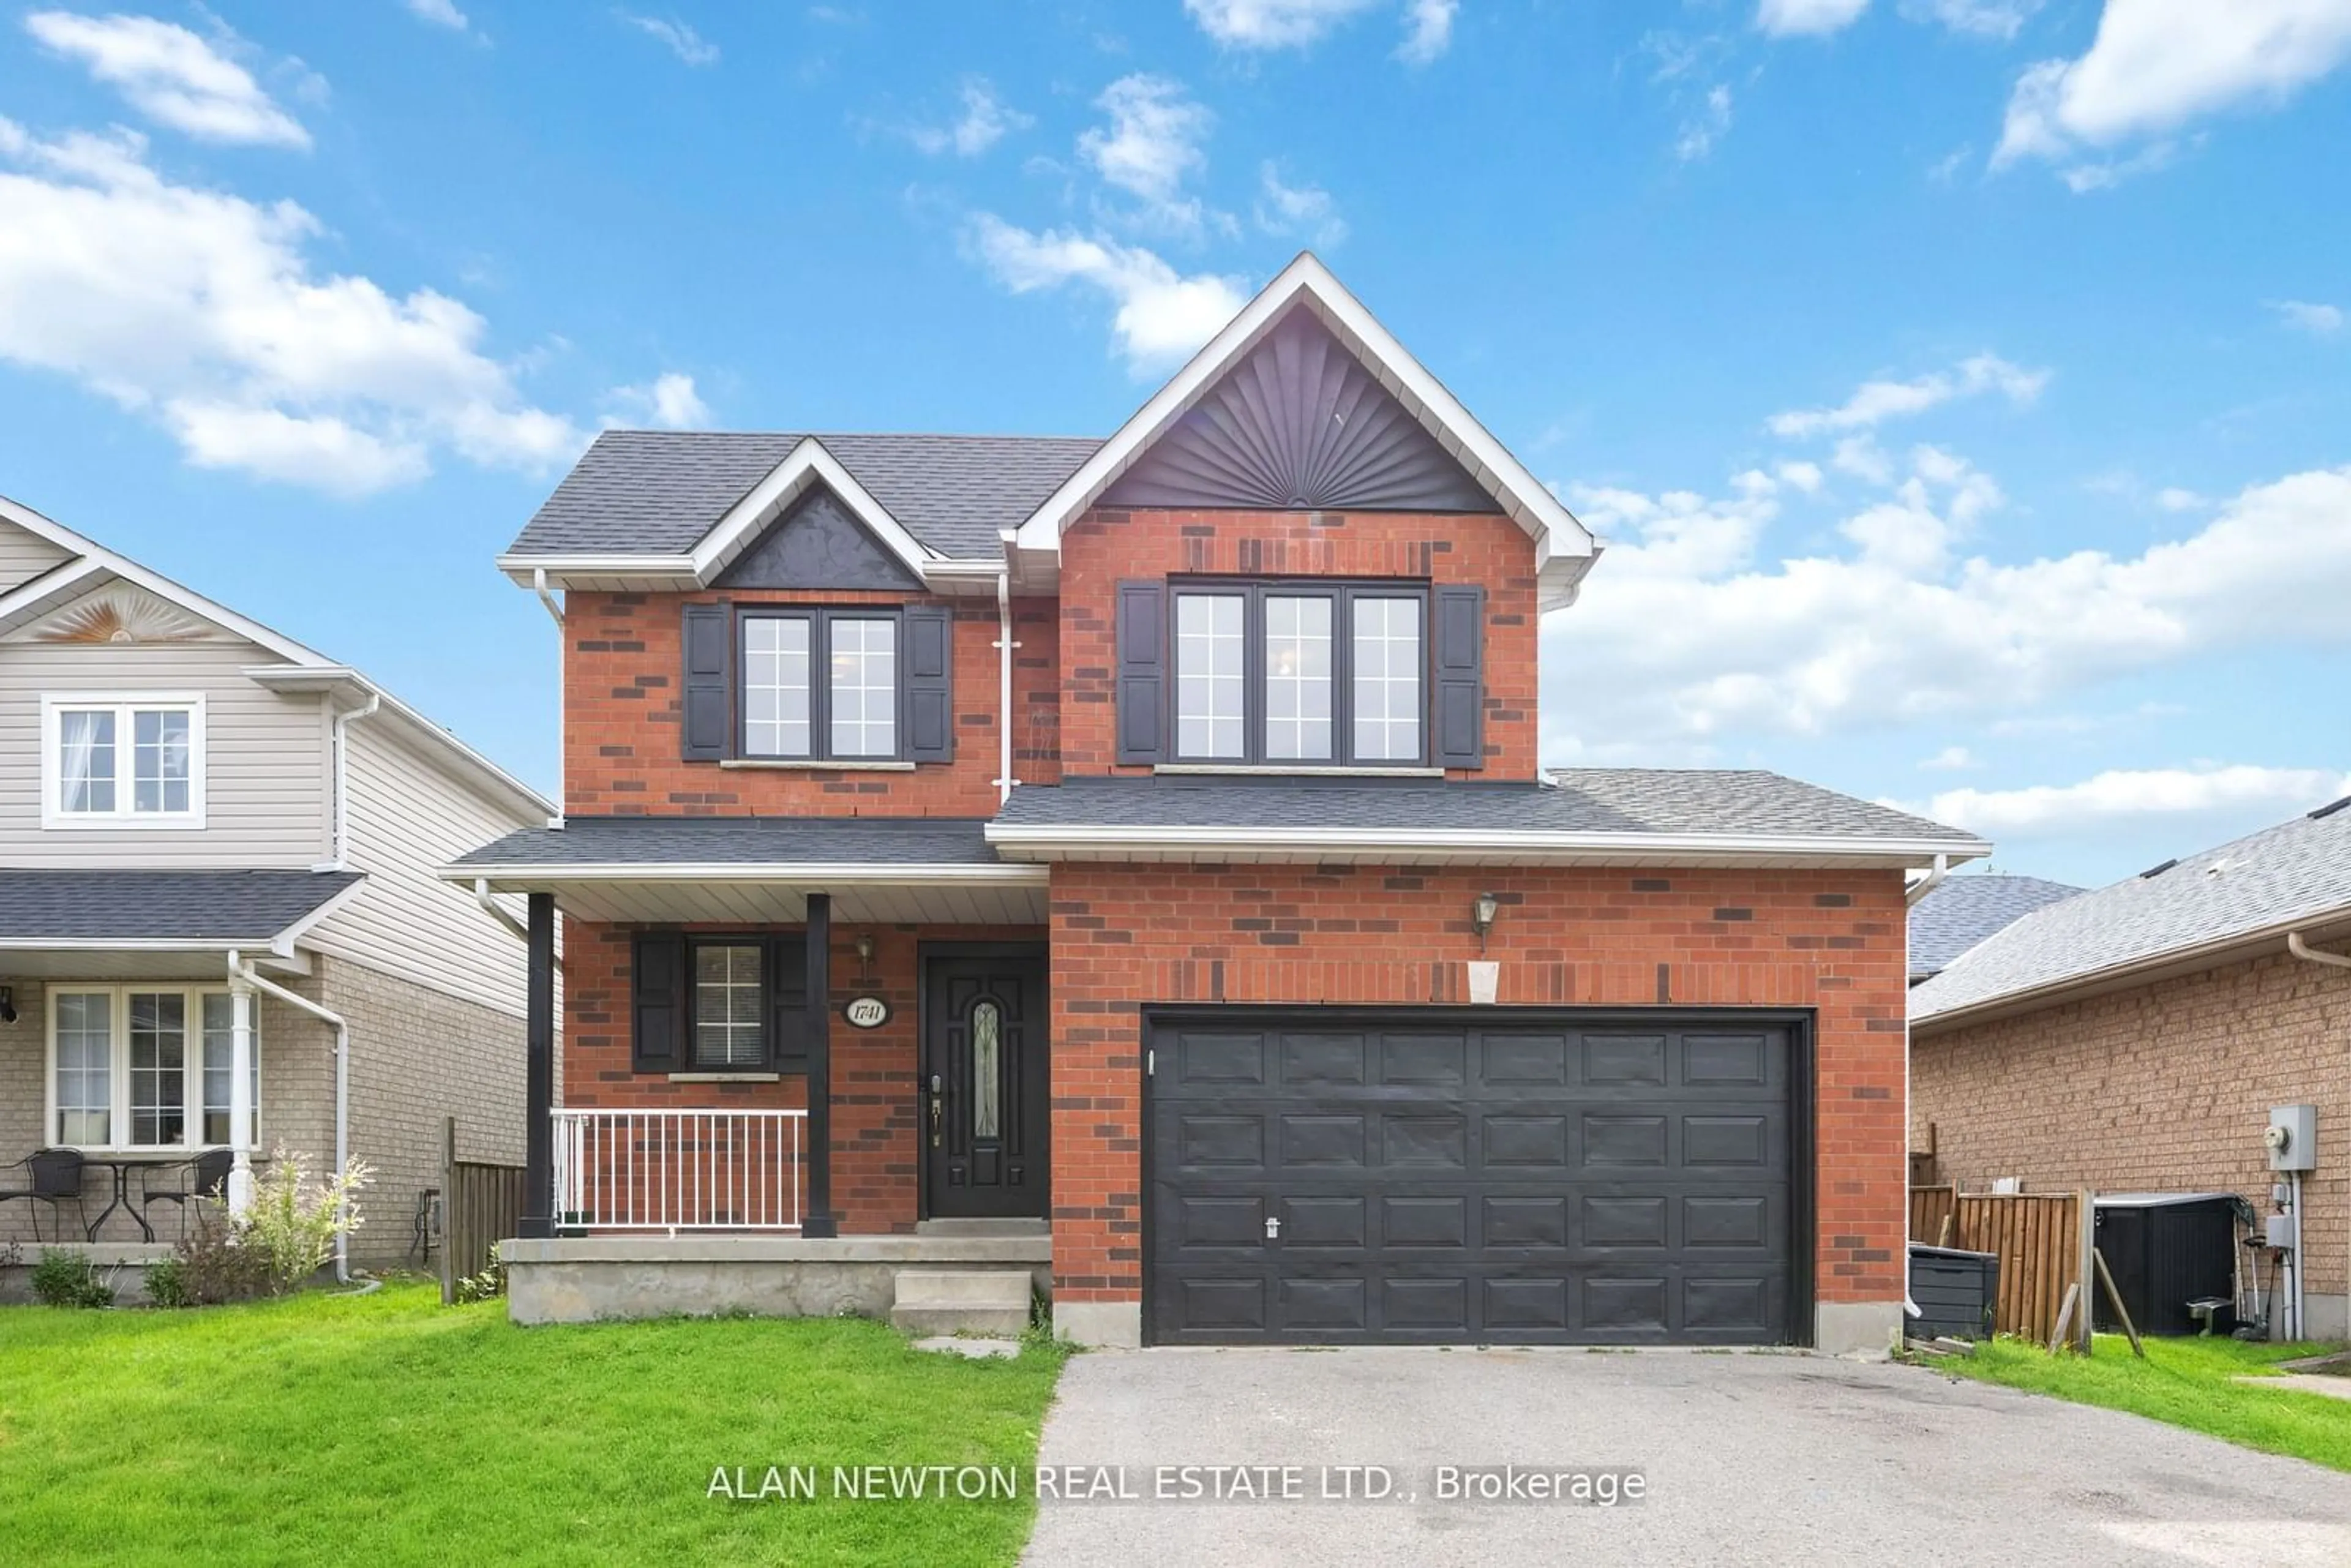 Home with brick exterior material for 1741 Mcgill Crt, Oshawa Ontario L1G 8A3